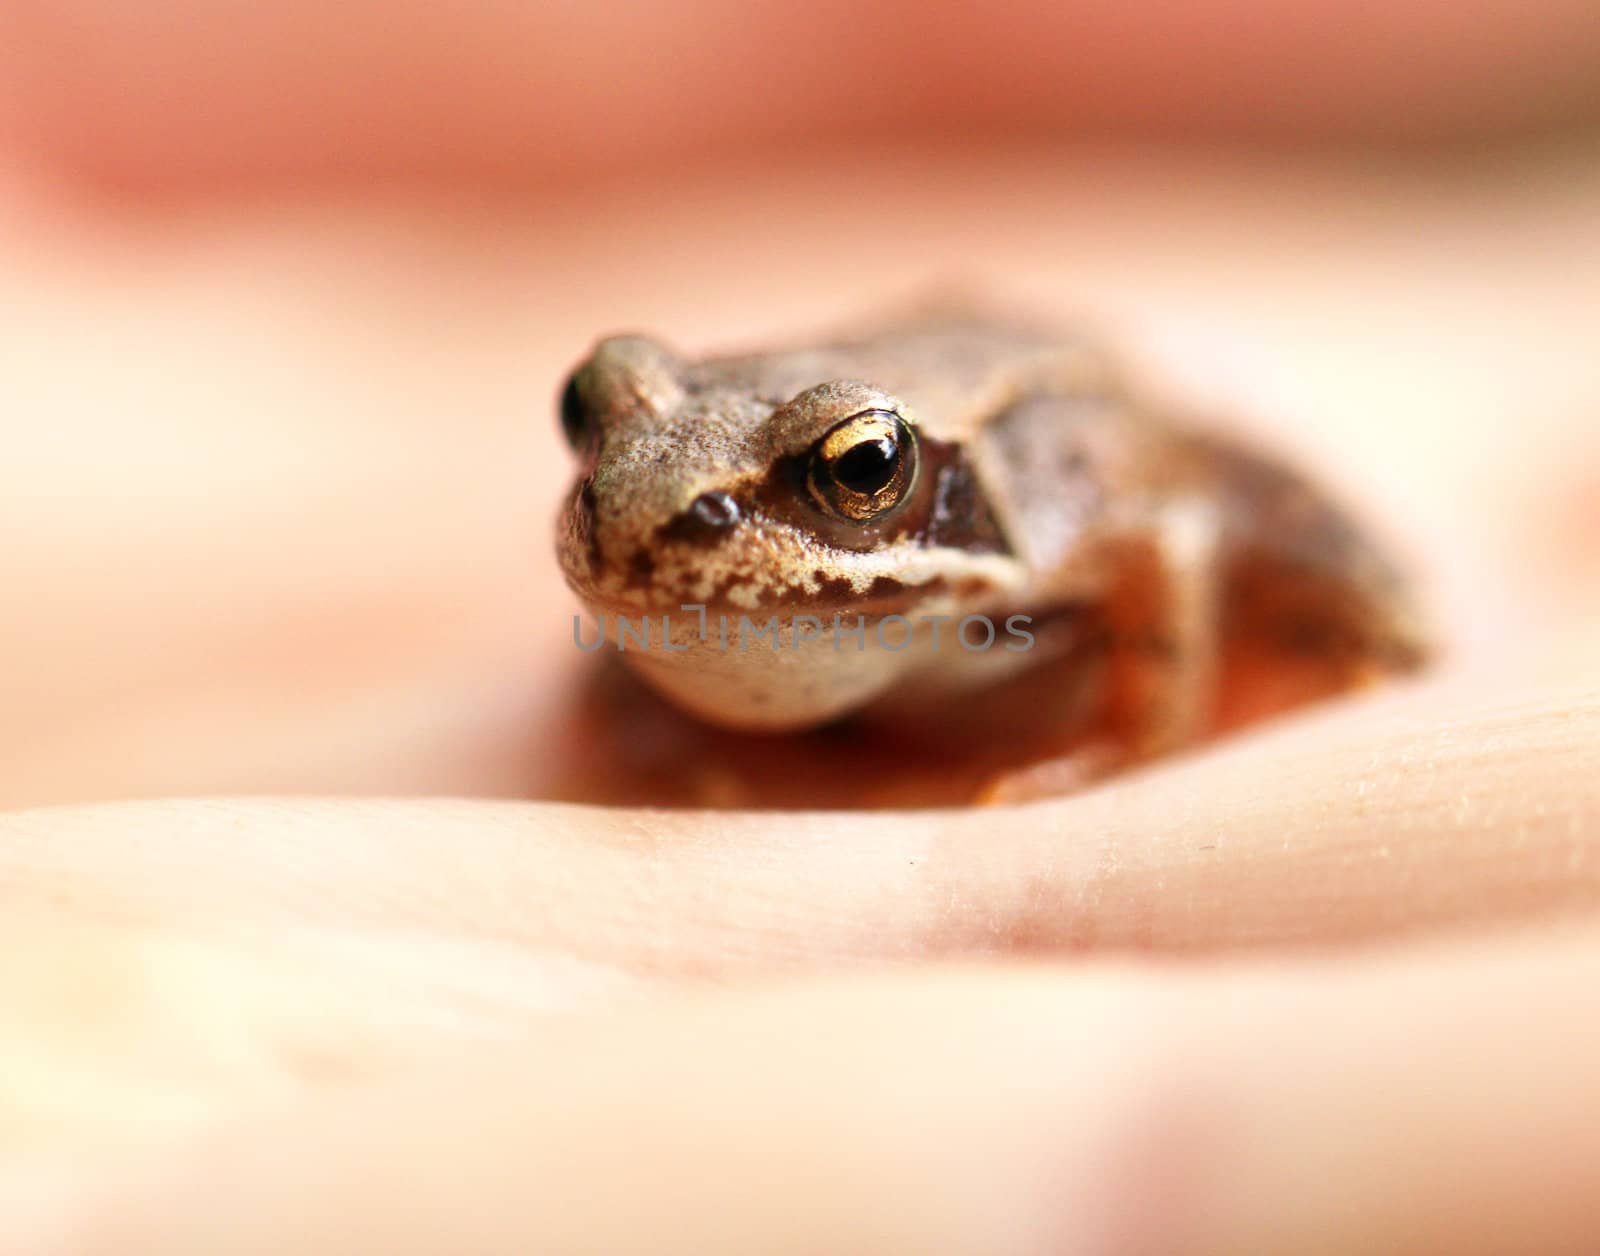 A small brown frog on hand by kostin77